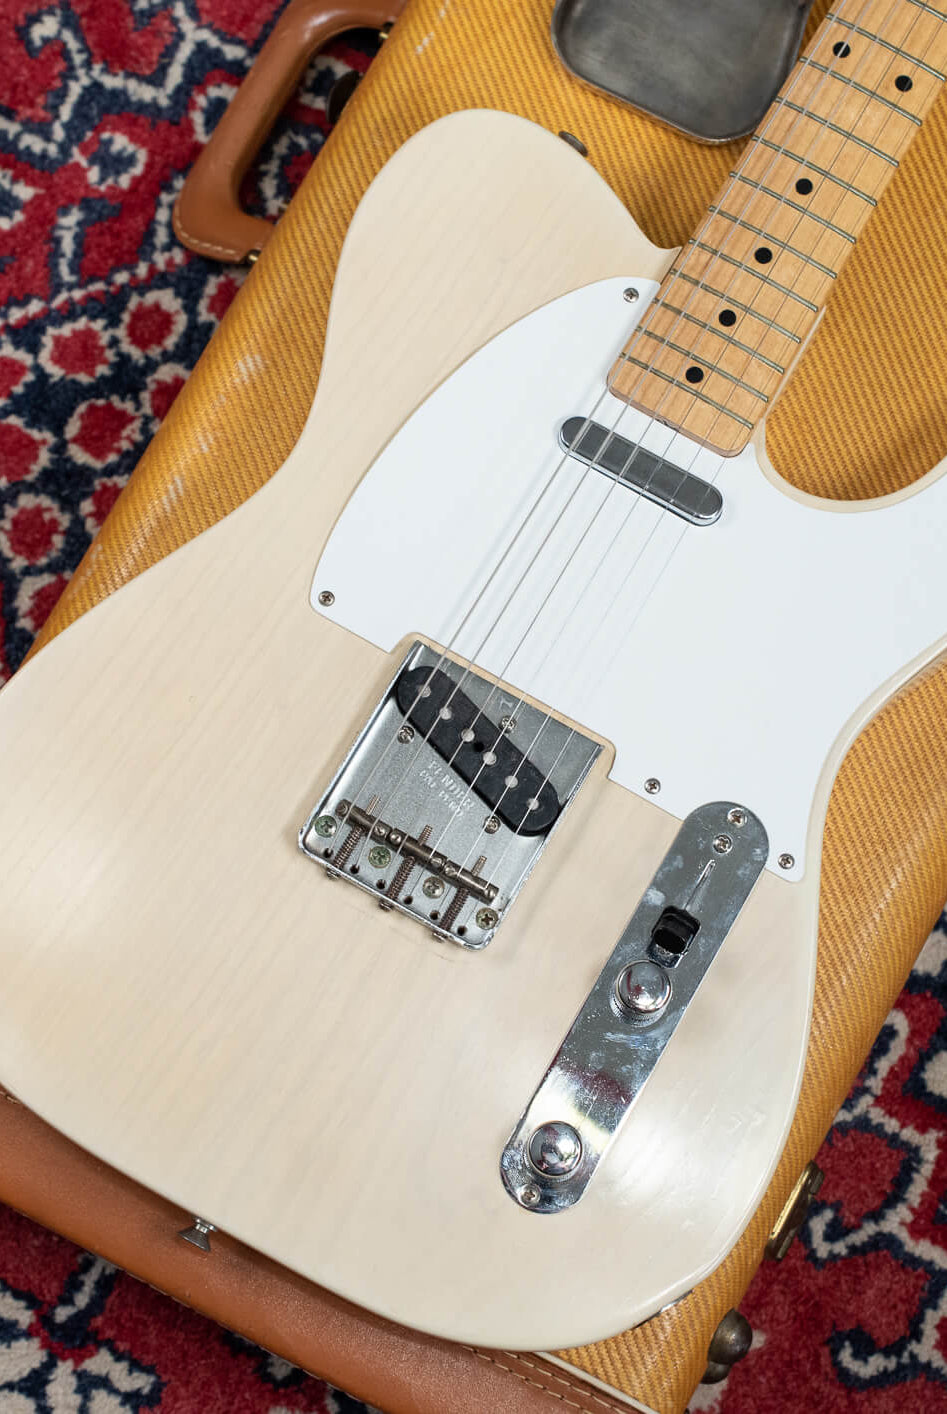 Fender Telecaster: How to date Telecaster and how much is it worth?